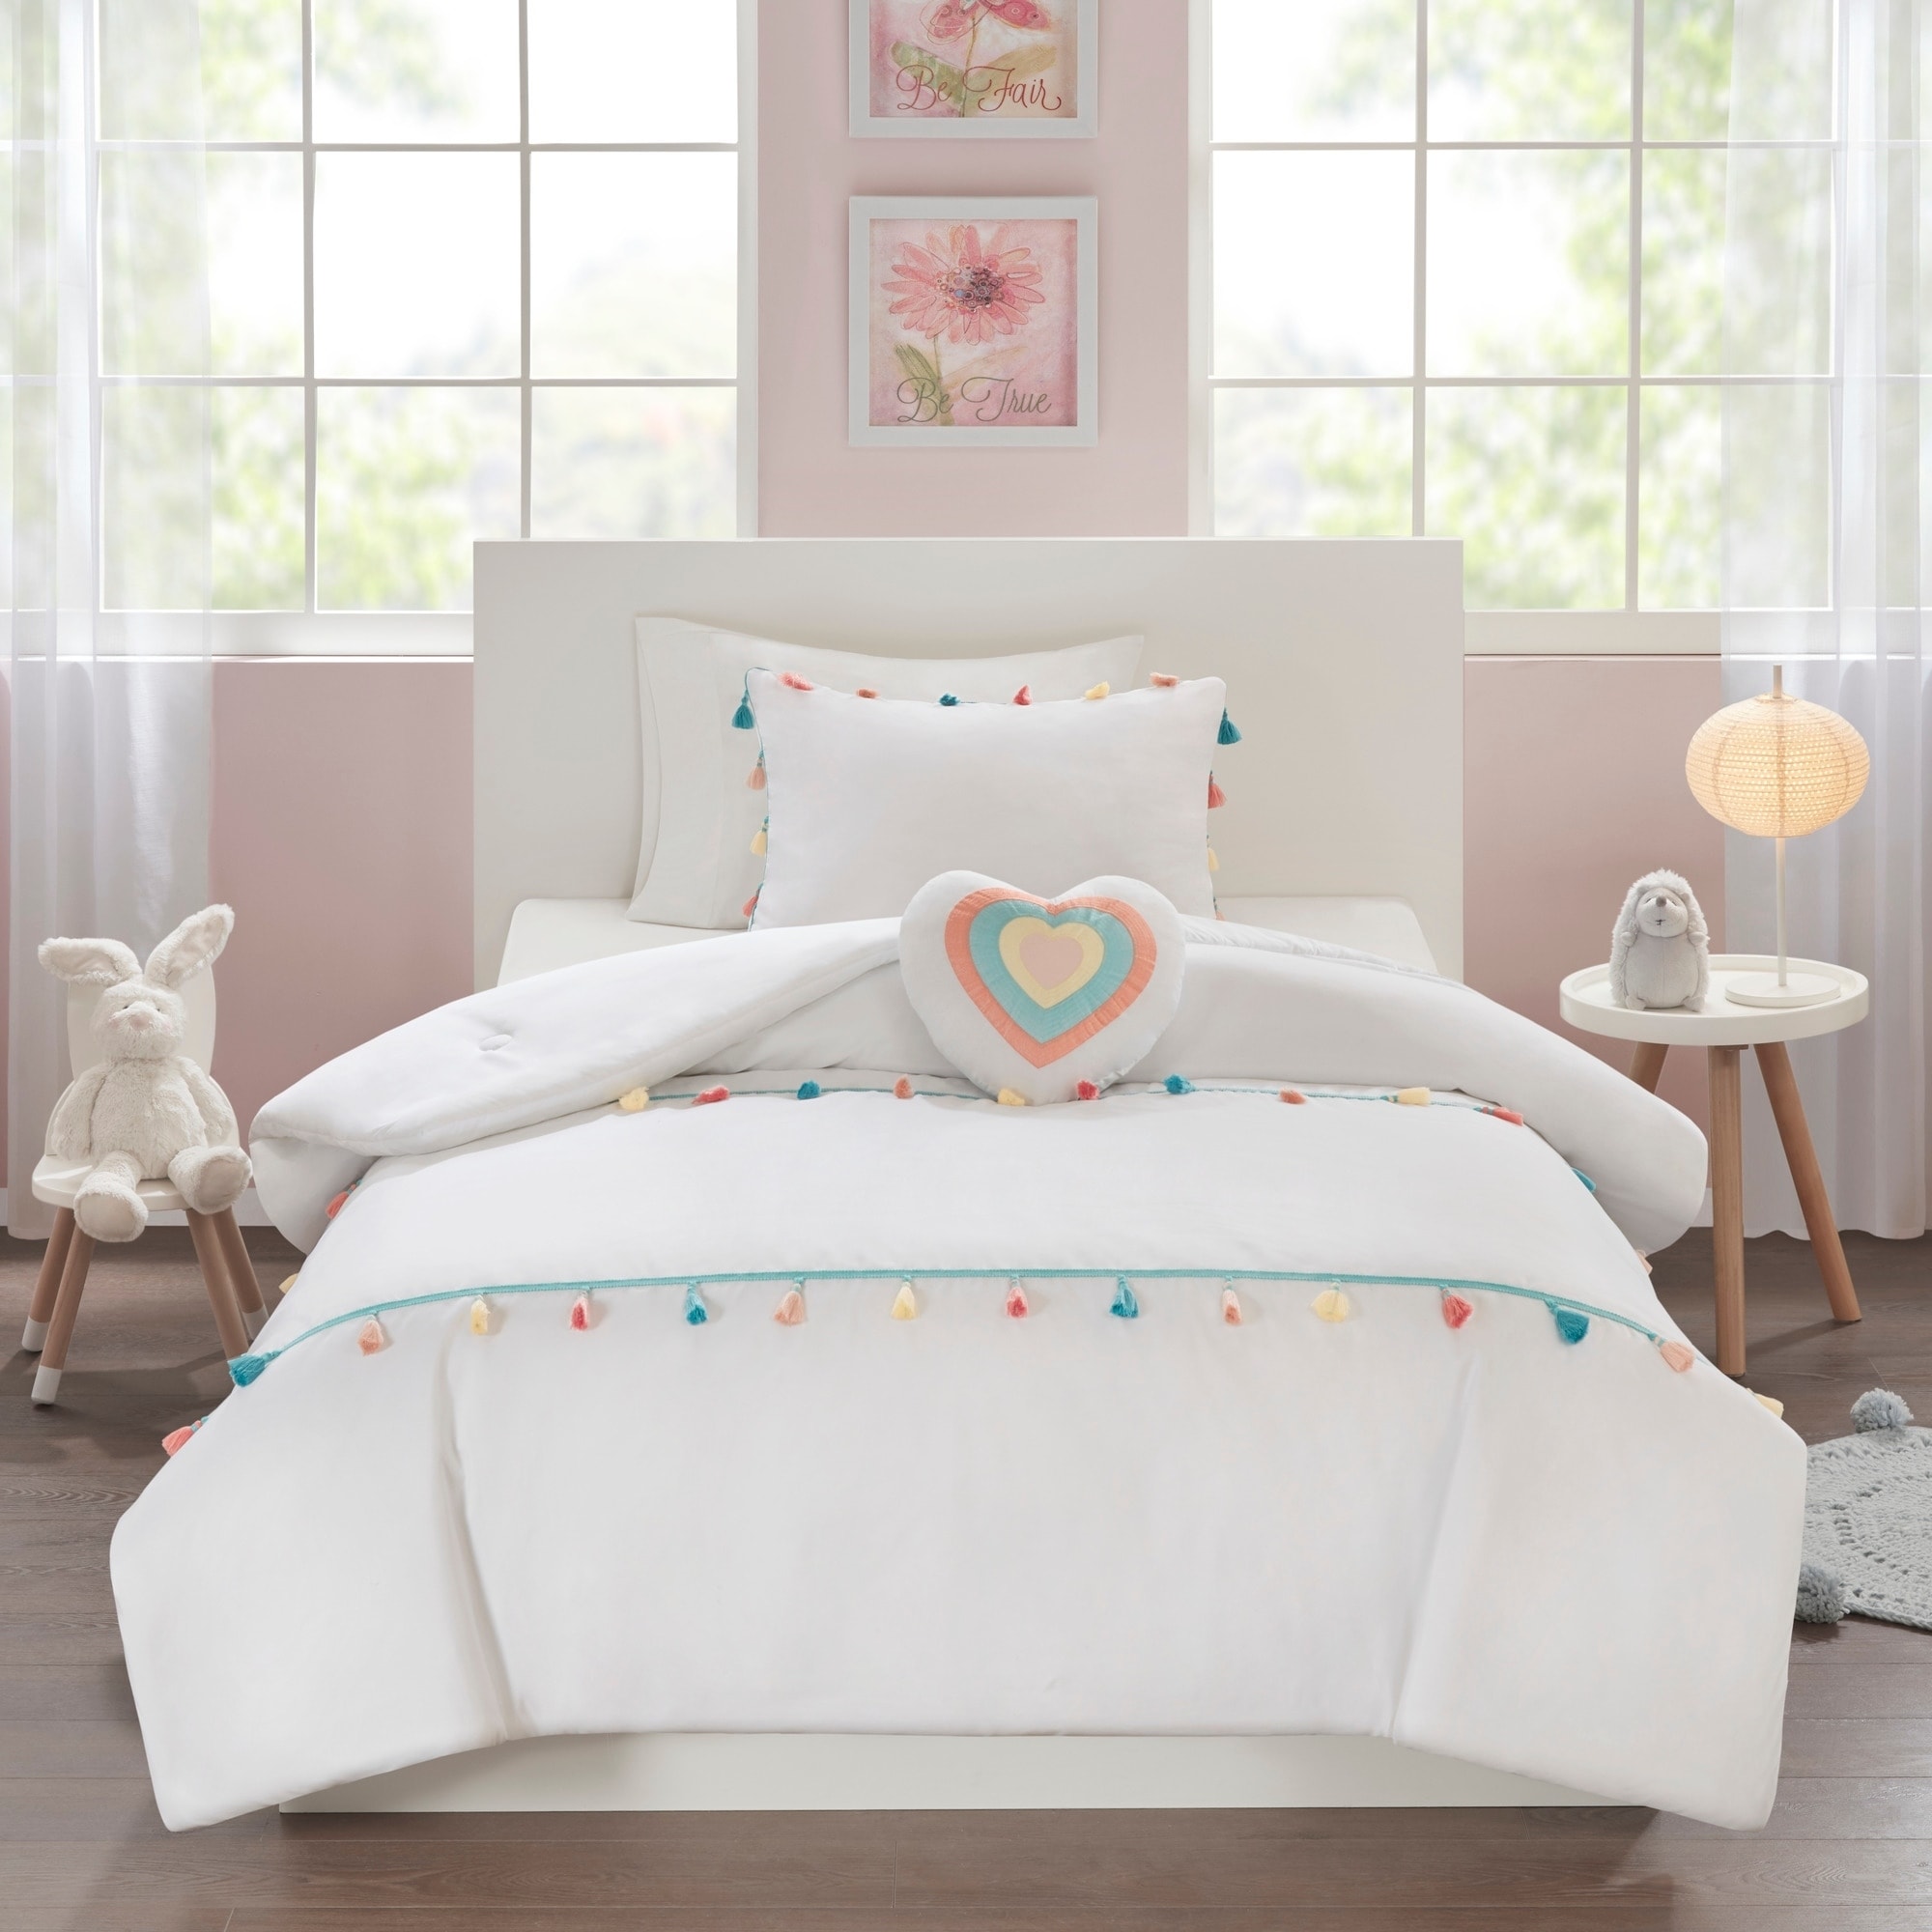 childrens bed sets and curtains